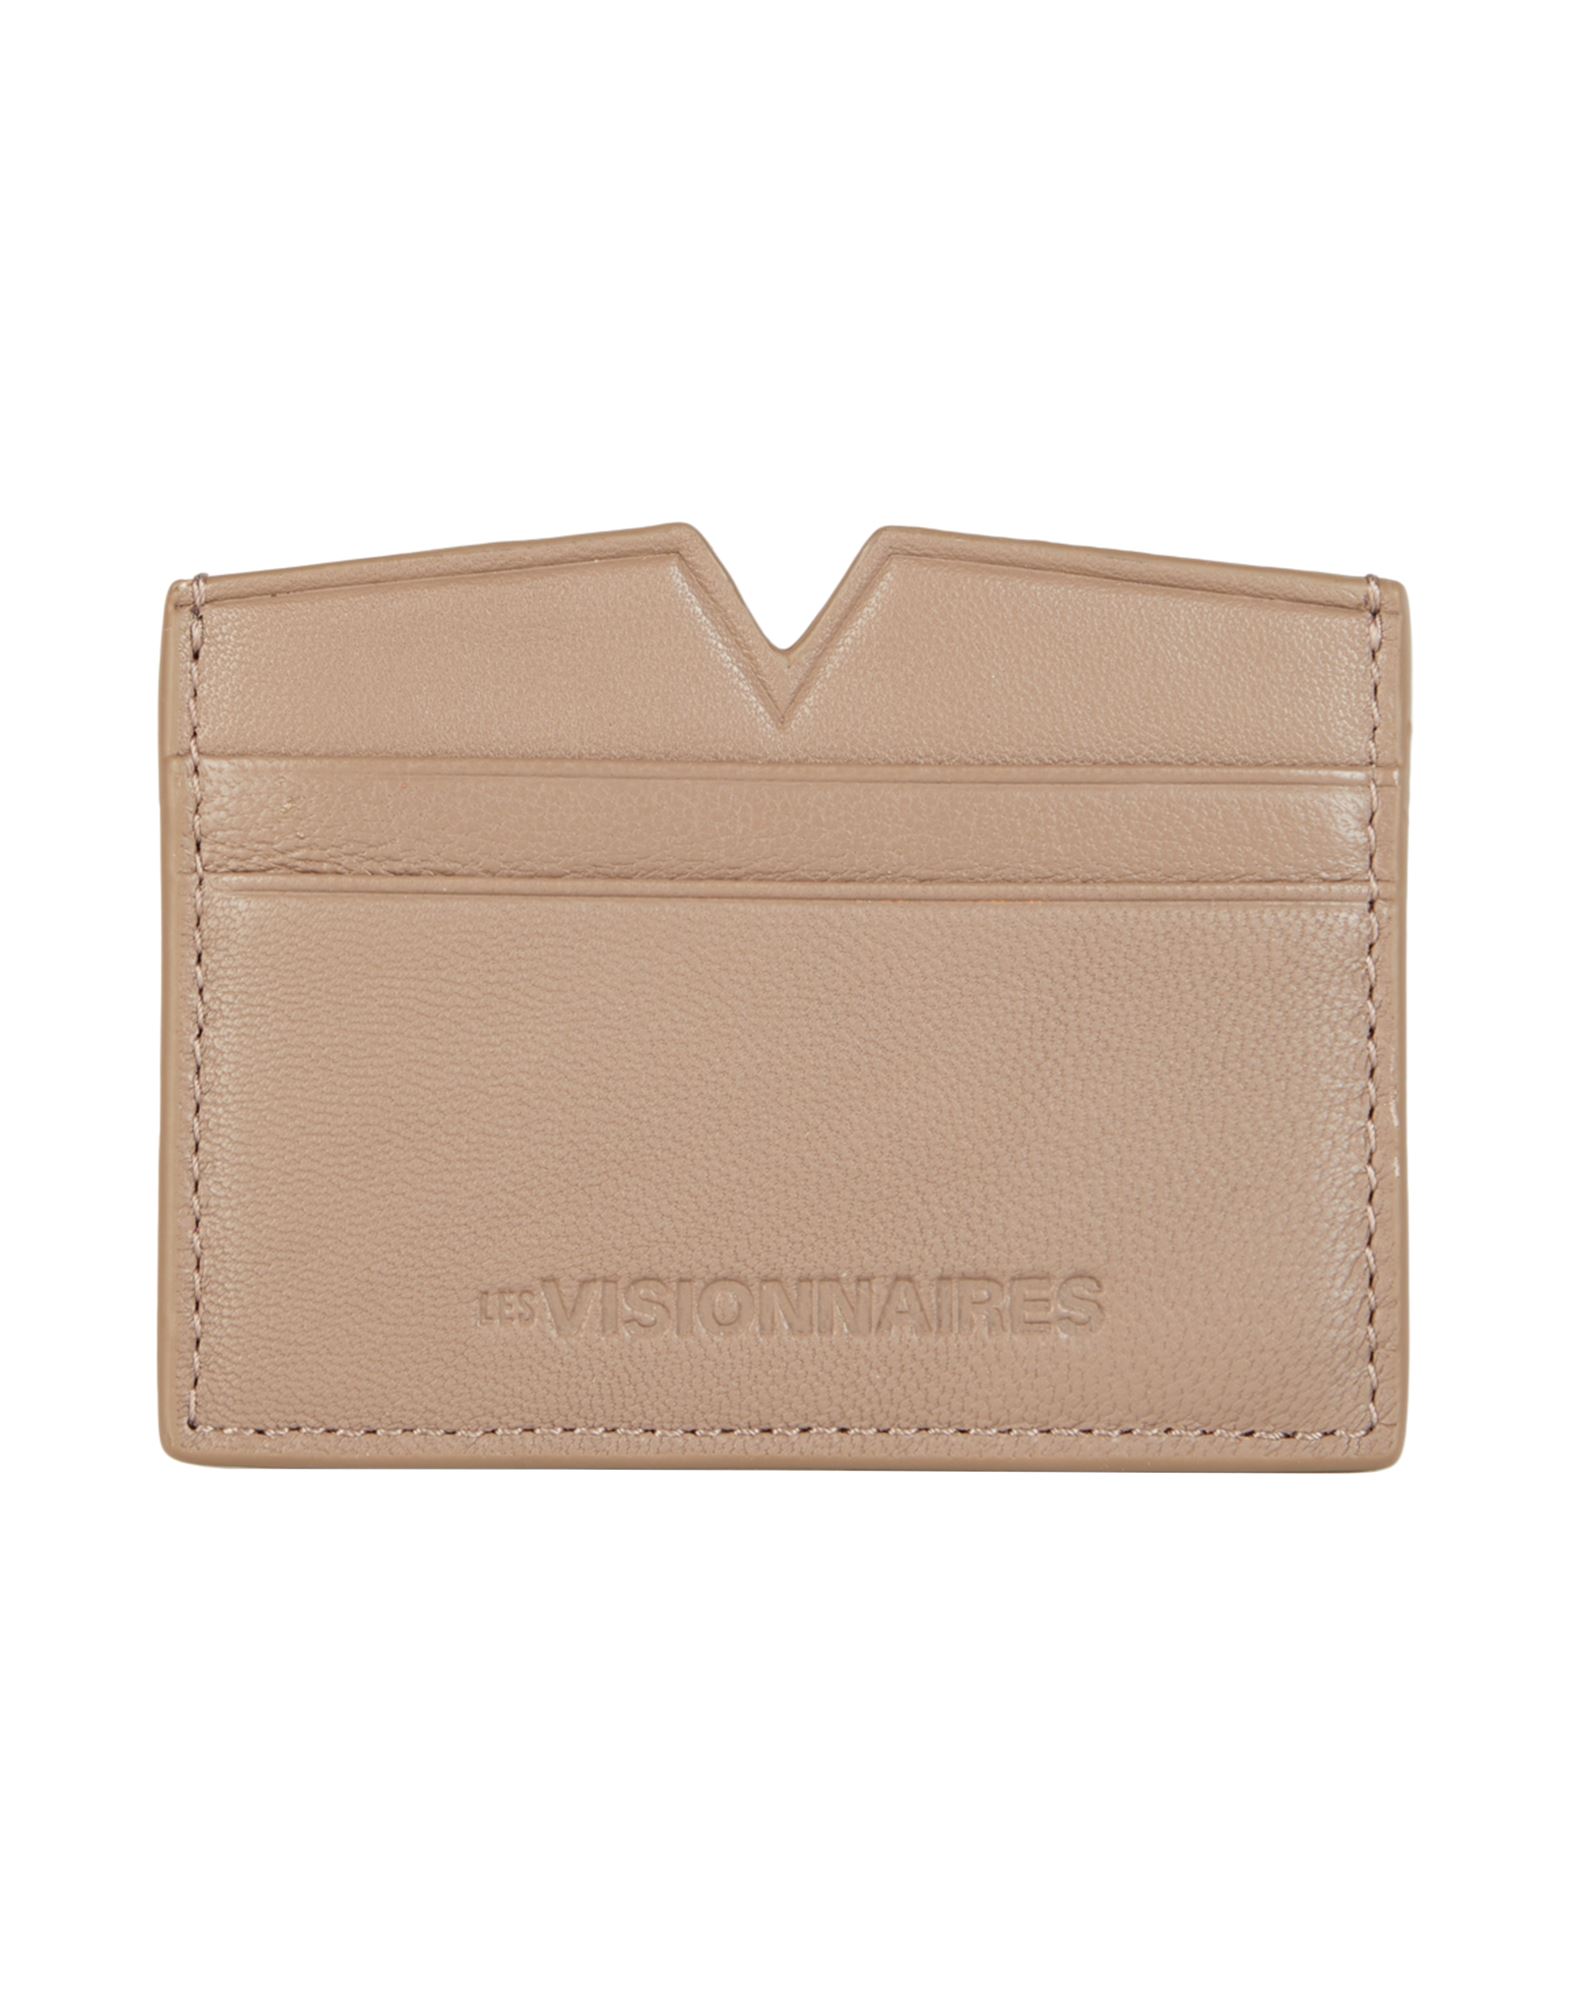 Shop Les Visionnaires Fenya Silky Leather Woman Document Holder Dove Grey Size - Lambskin